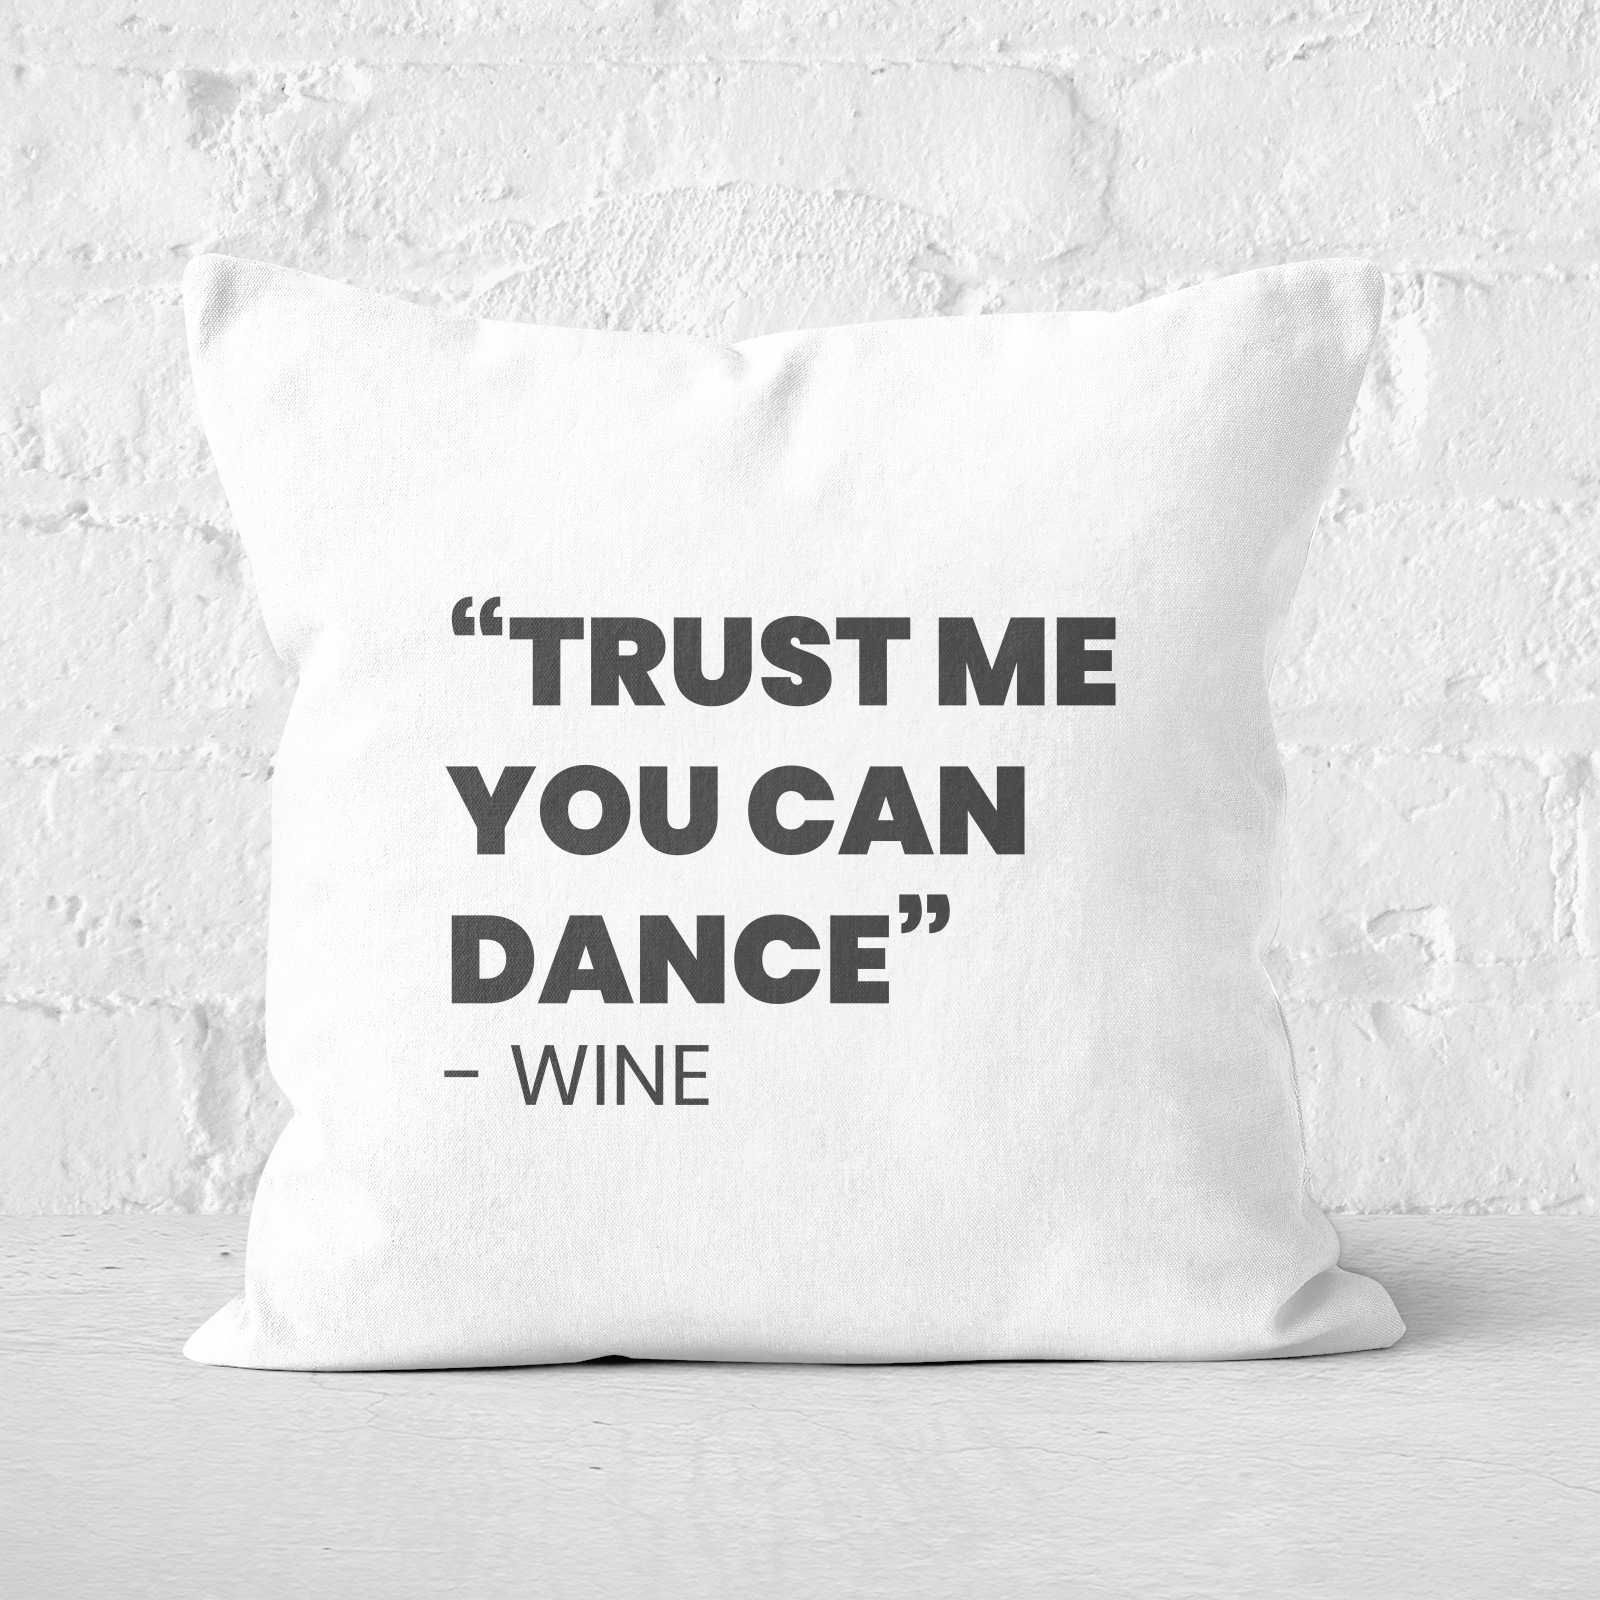 Trust Me You Can Dance - Wine Square Cushion - 60x60cm - Soft Touch